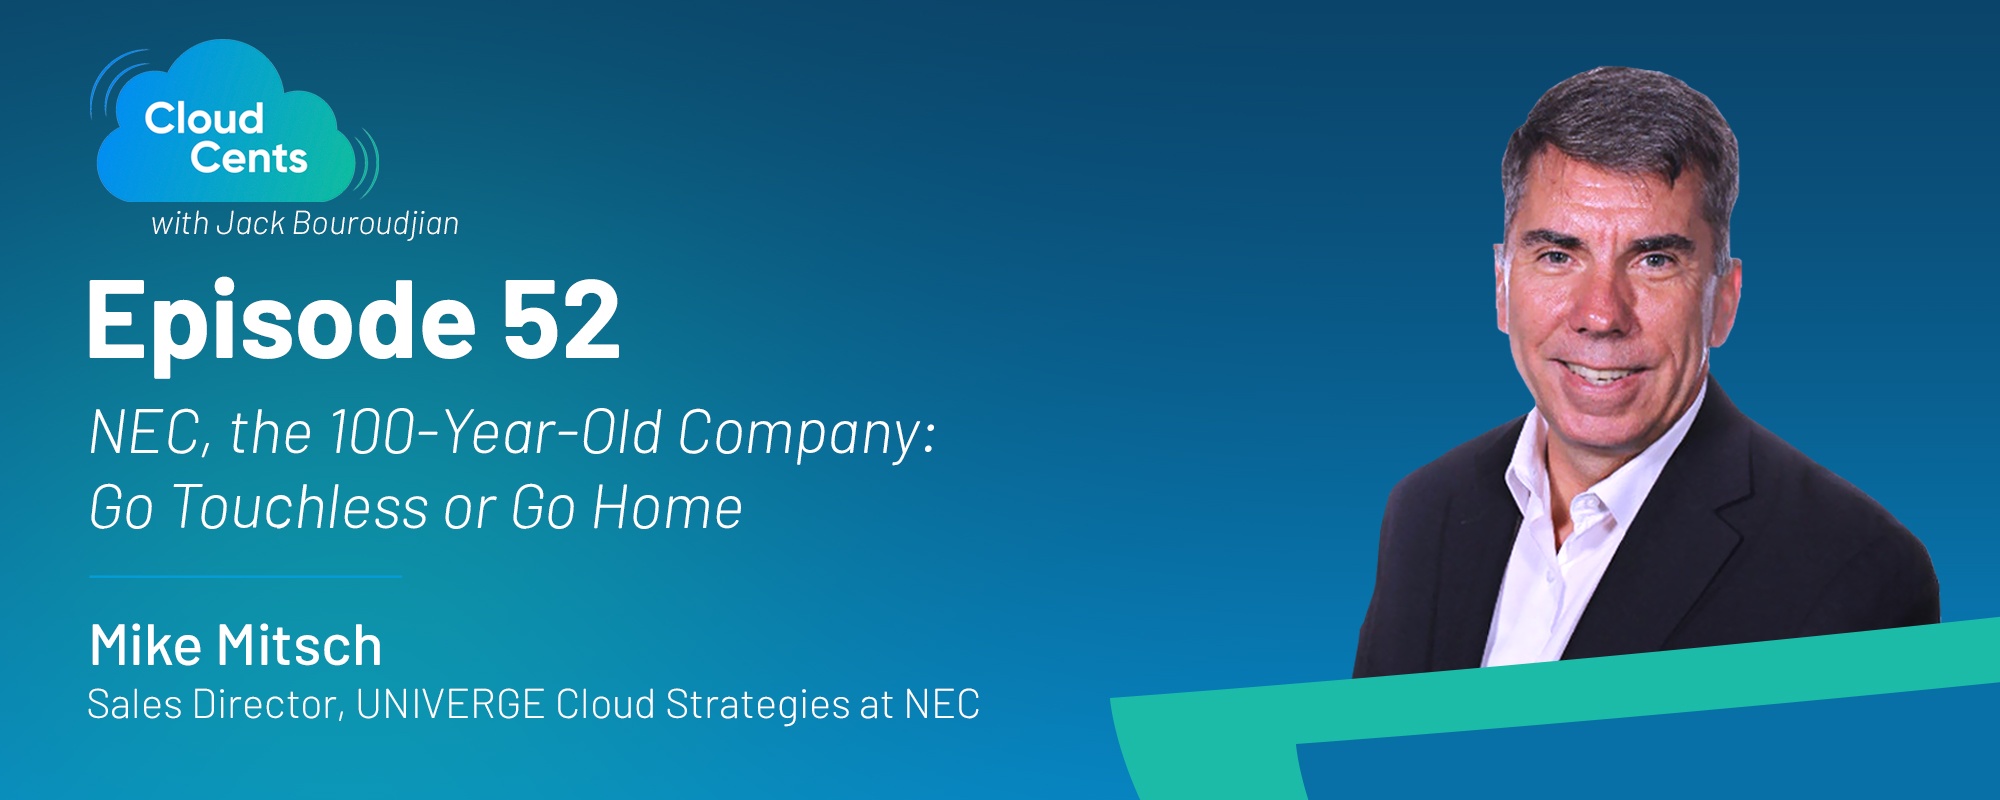 CloudCents episode 52 - NEC, the 100-Year-Old Company: Go Touchless or Go Home